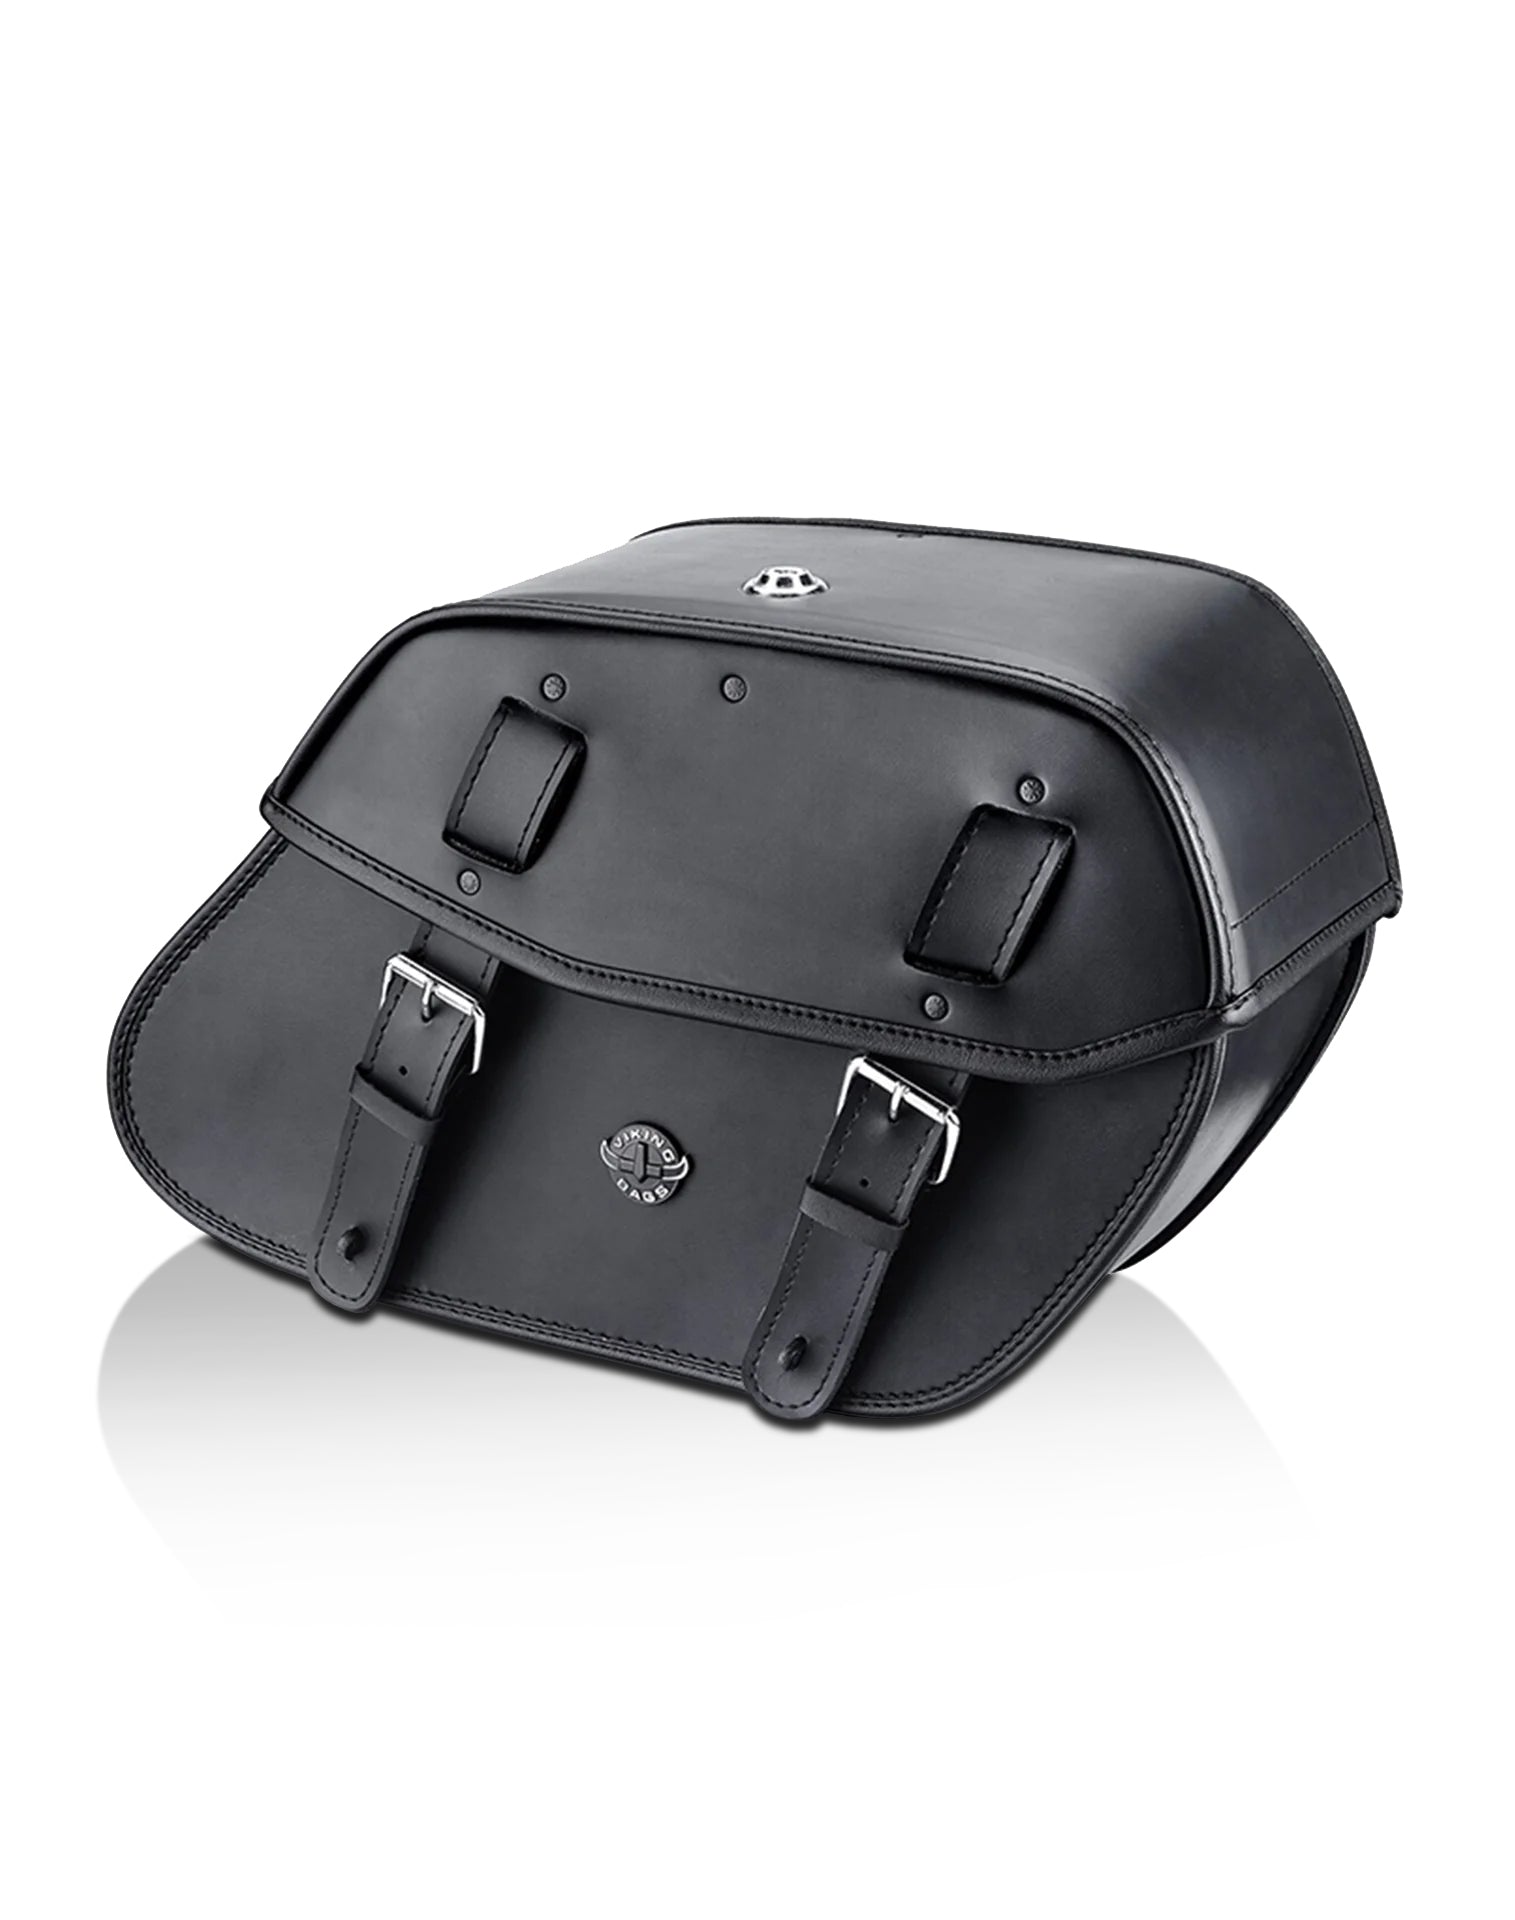 Viking Odin Large Leather Motorcycle Saddlebags For Harley Softail Standard Fxst I Main View